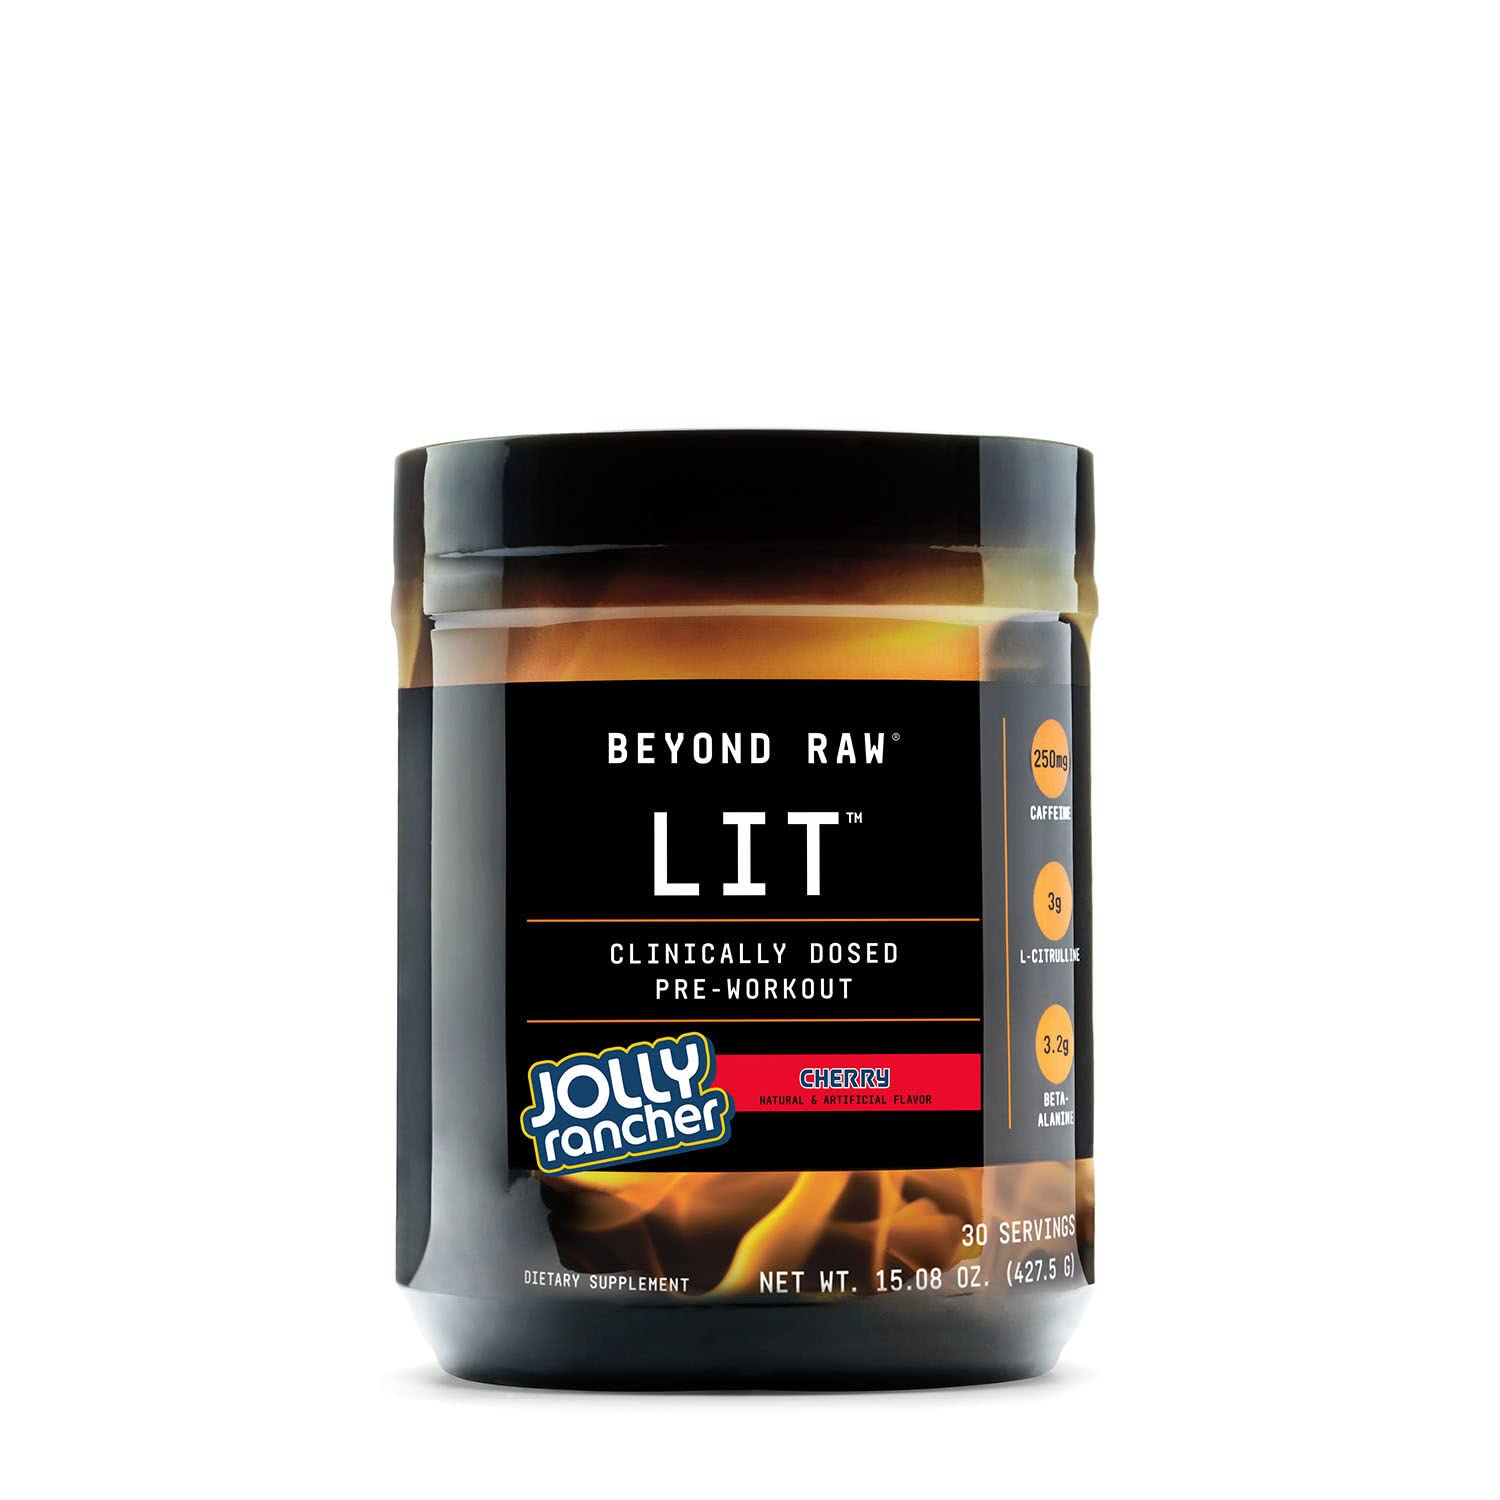 BEYOND RAW LIT | Clinically Dosed Pre-Workout Powder | Contains Caffeine, L-Citruline, and Beta-Alanine, Nitric Oxide and Preworkout Supplement | Jolly Rancher Cherry | 30 Servings